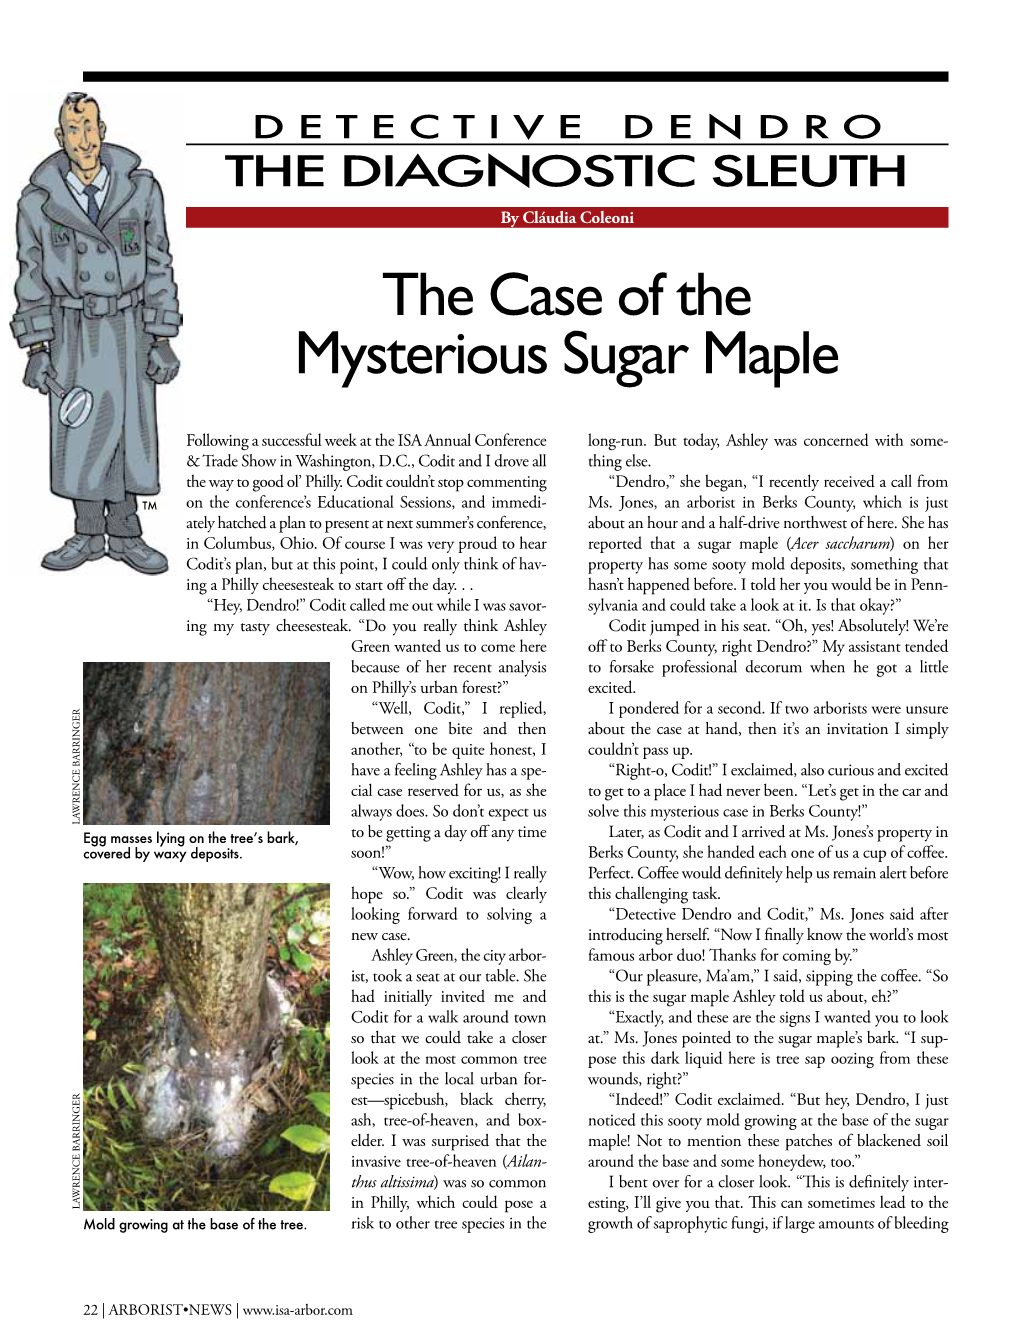 The Case of the Mysterious Sugar Maple